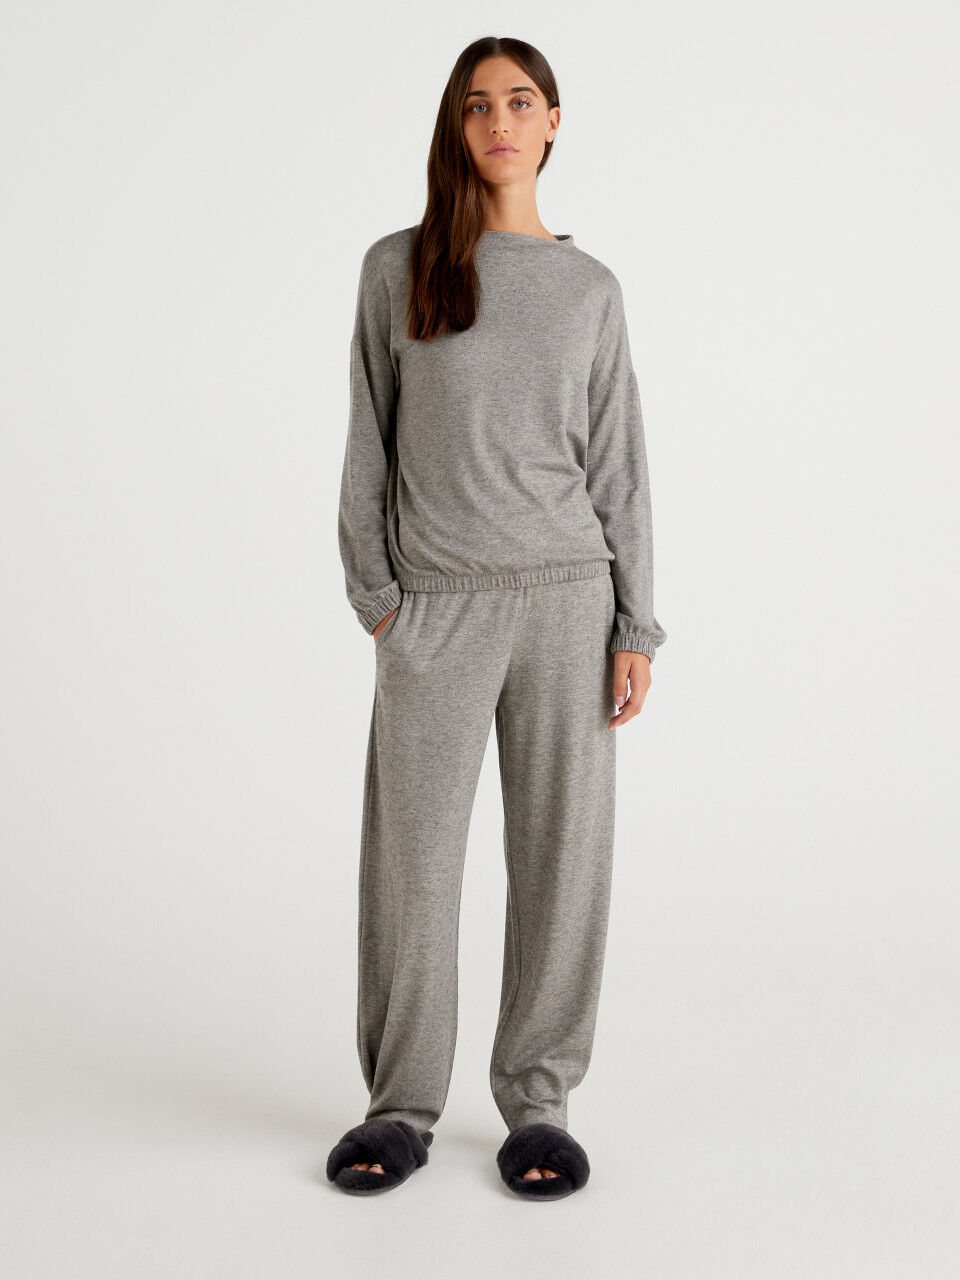 High-waisted marl trousers